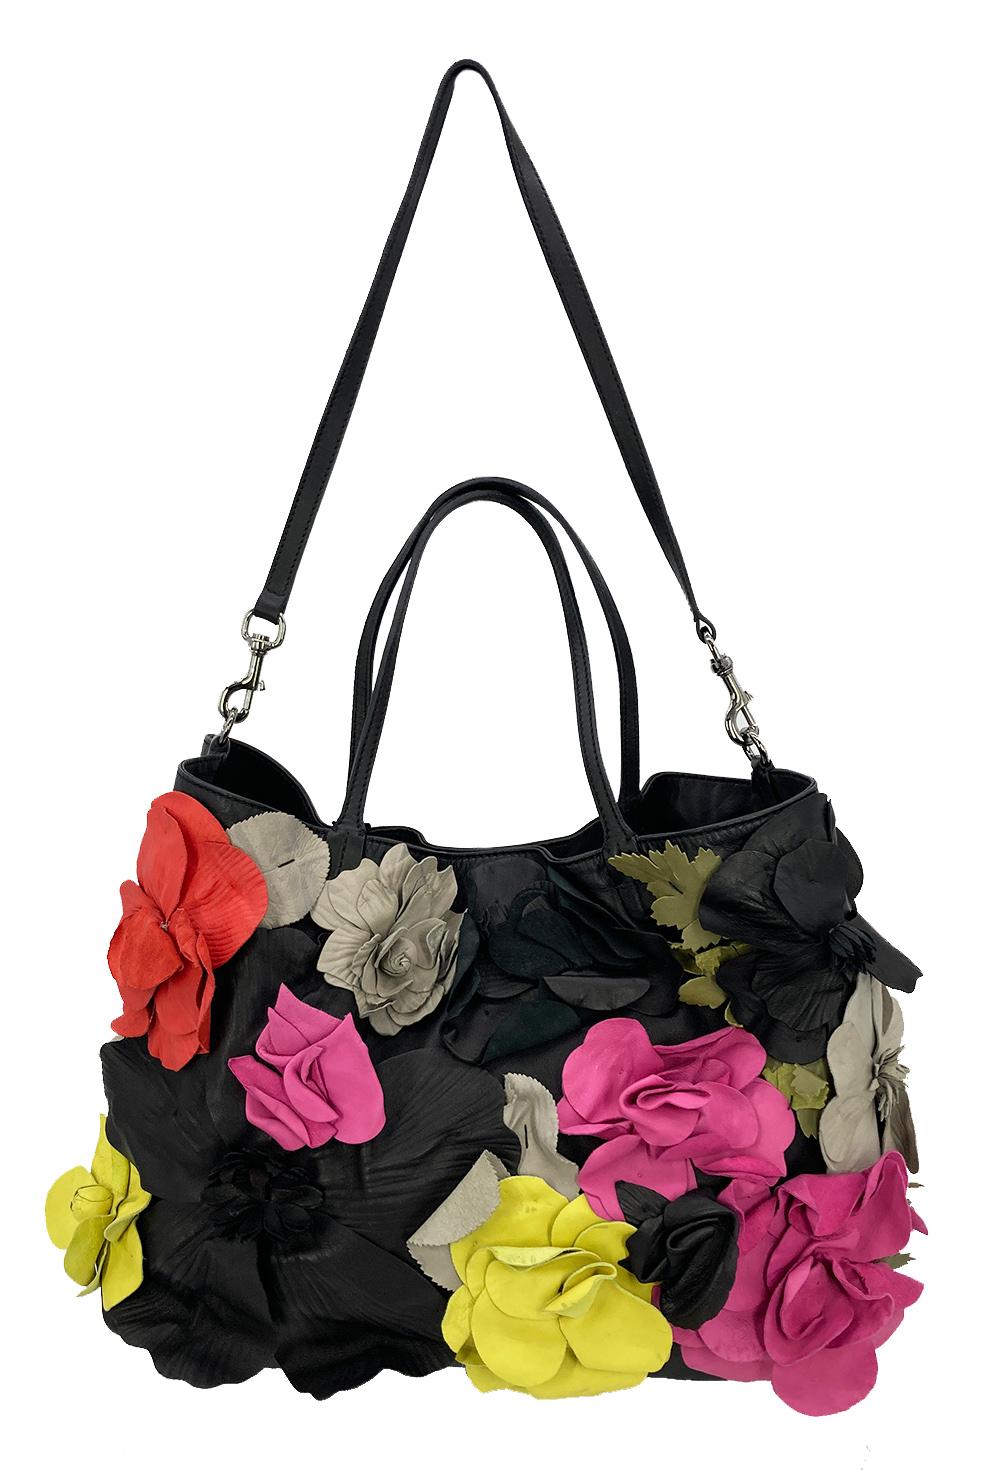 Valentino Leather Floral Embellished Tote in excellent condition. Super soft black leather exterior trimmed with multi color leather floral embellishments along front side. Matching removable leather shoulder strap easily converts between tote and